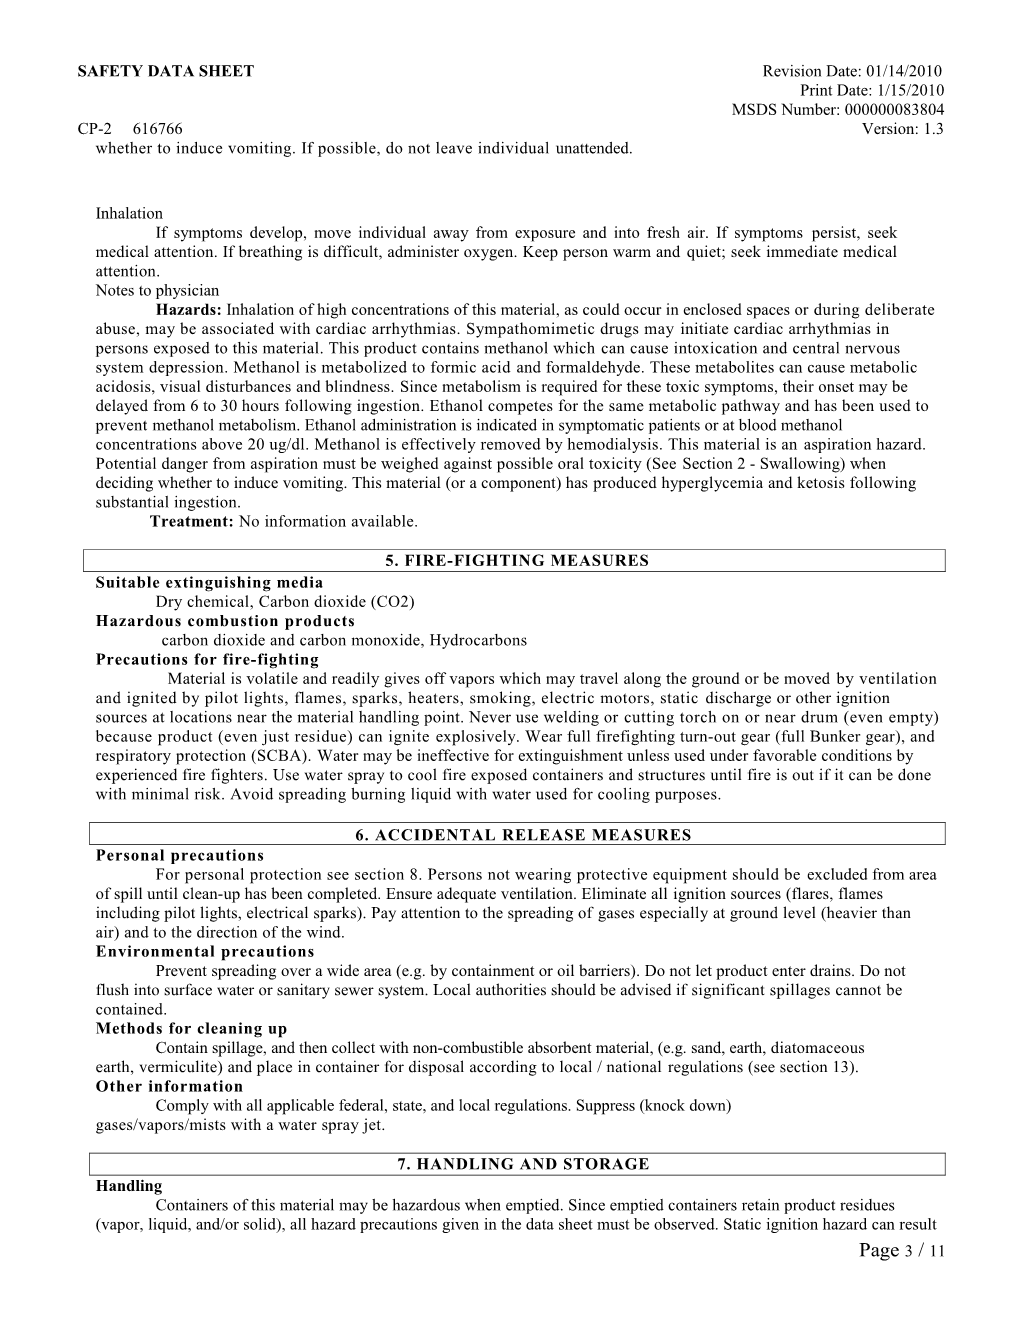 SAFETY DATA SHEET Revision Date: 01/14/2010